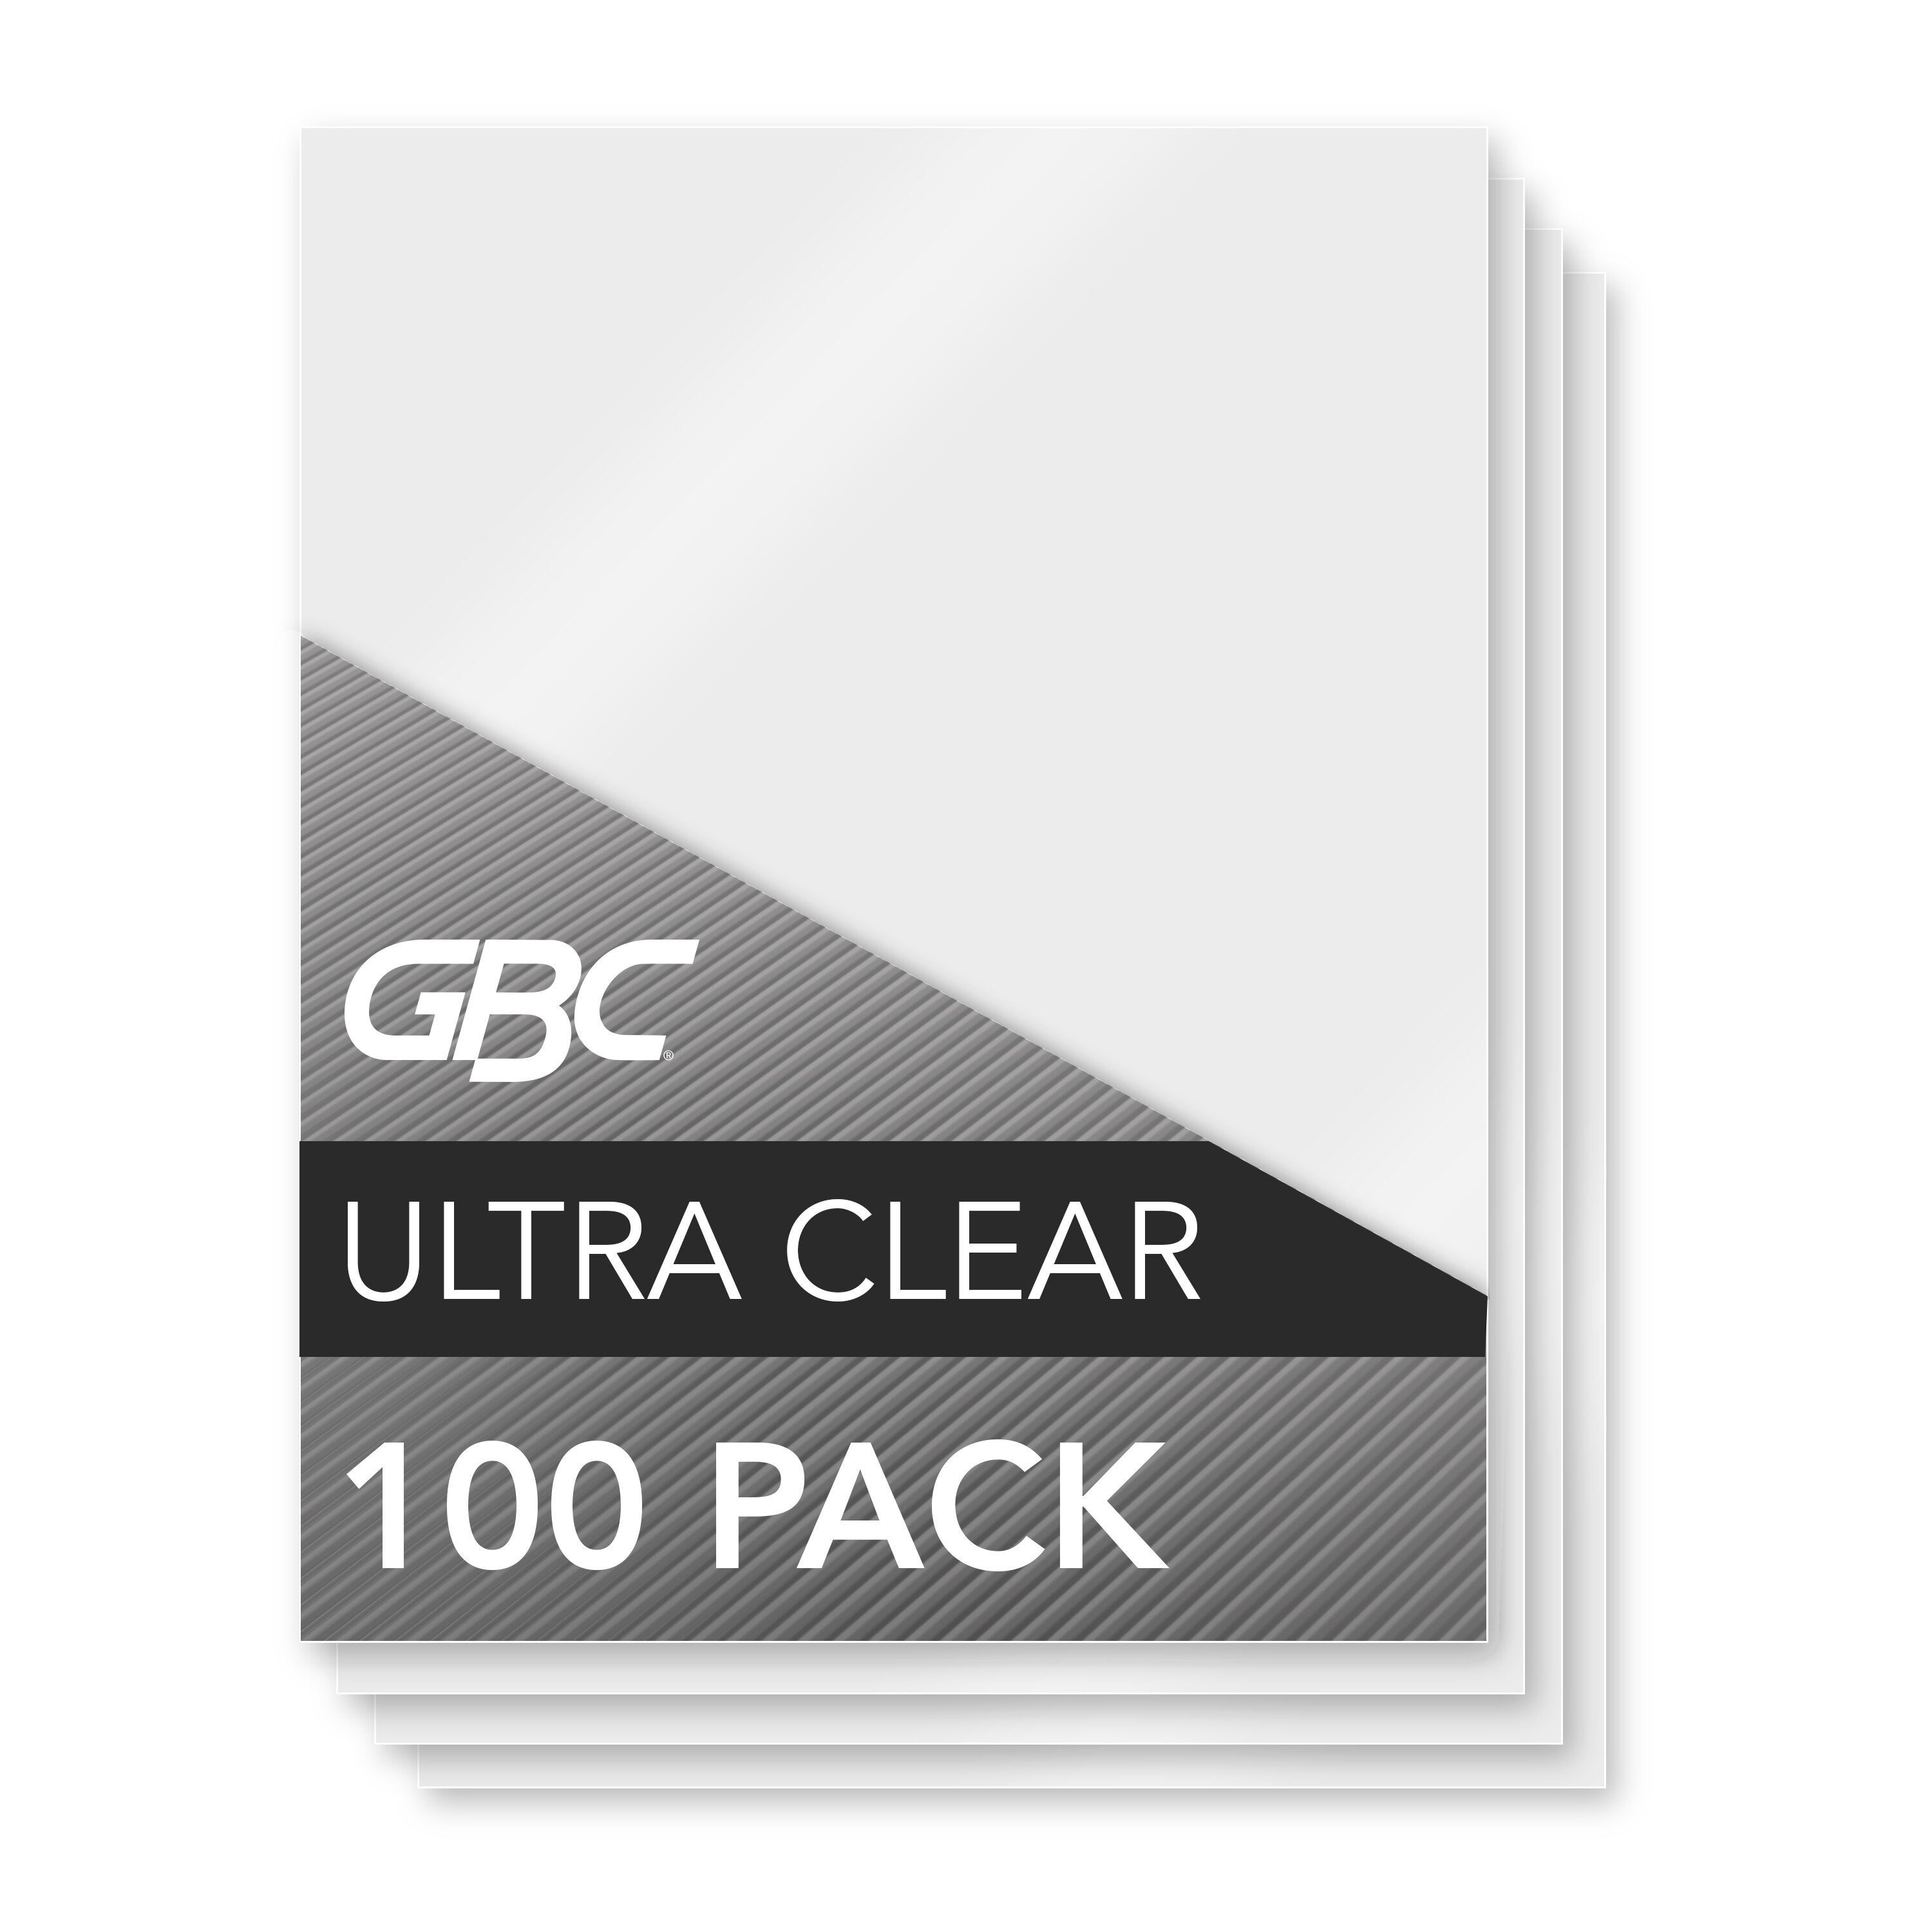 GBC Ultra Clear Thermal Laminating Pouches - Letter Size, 5 mil, 100 Pack